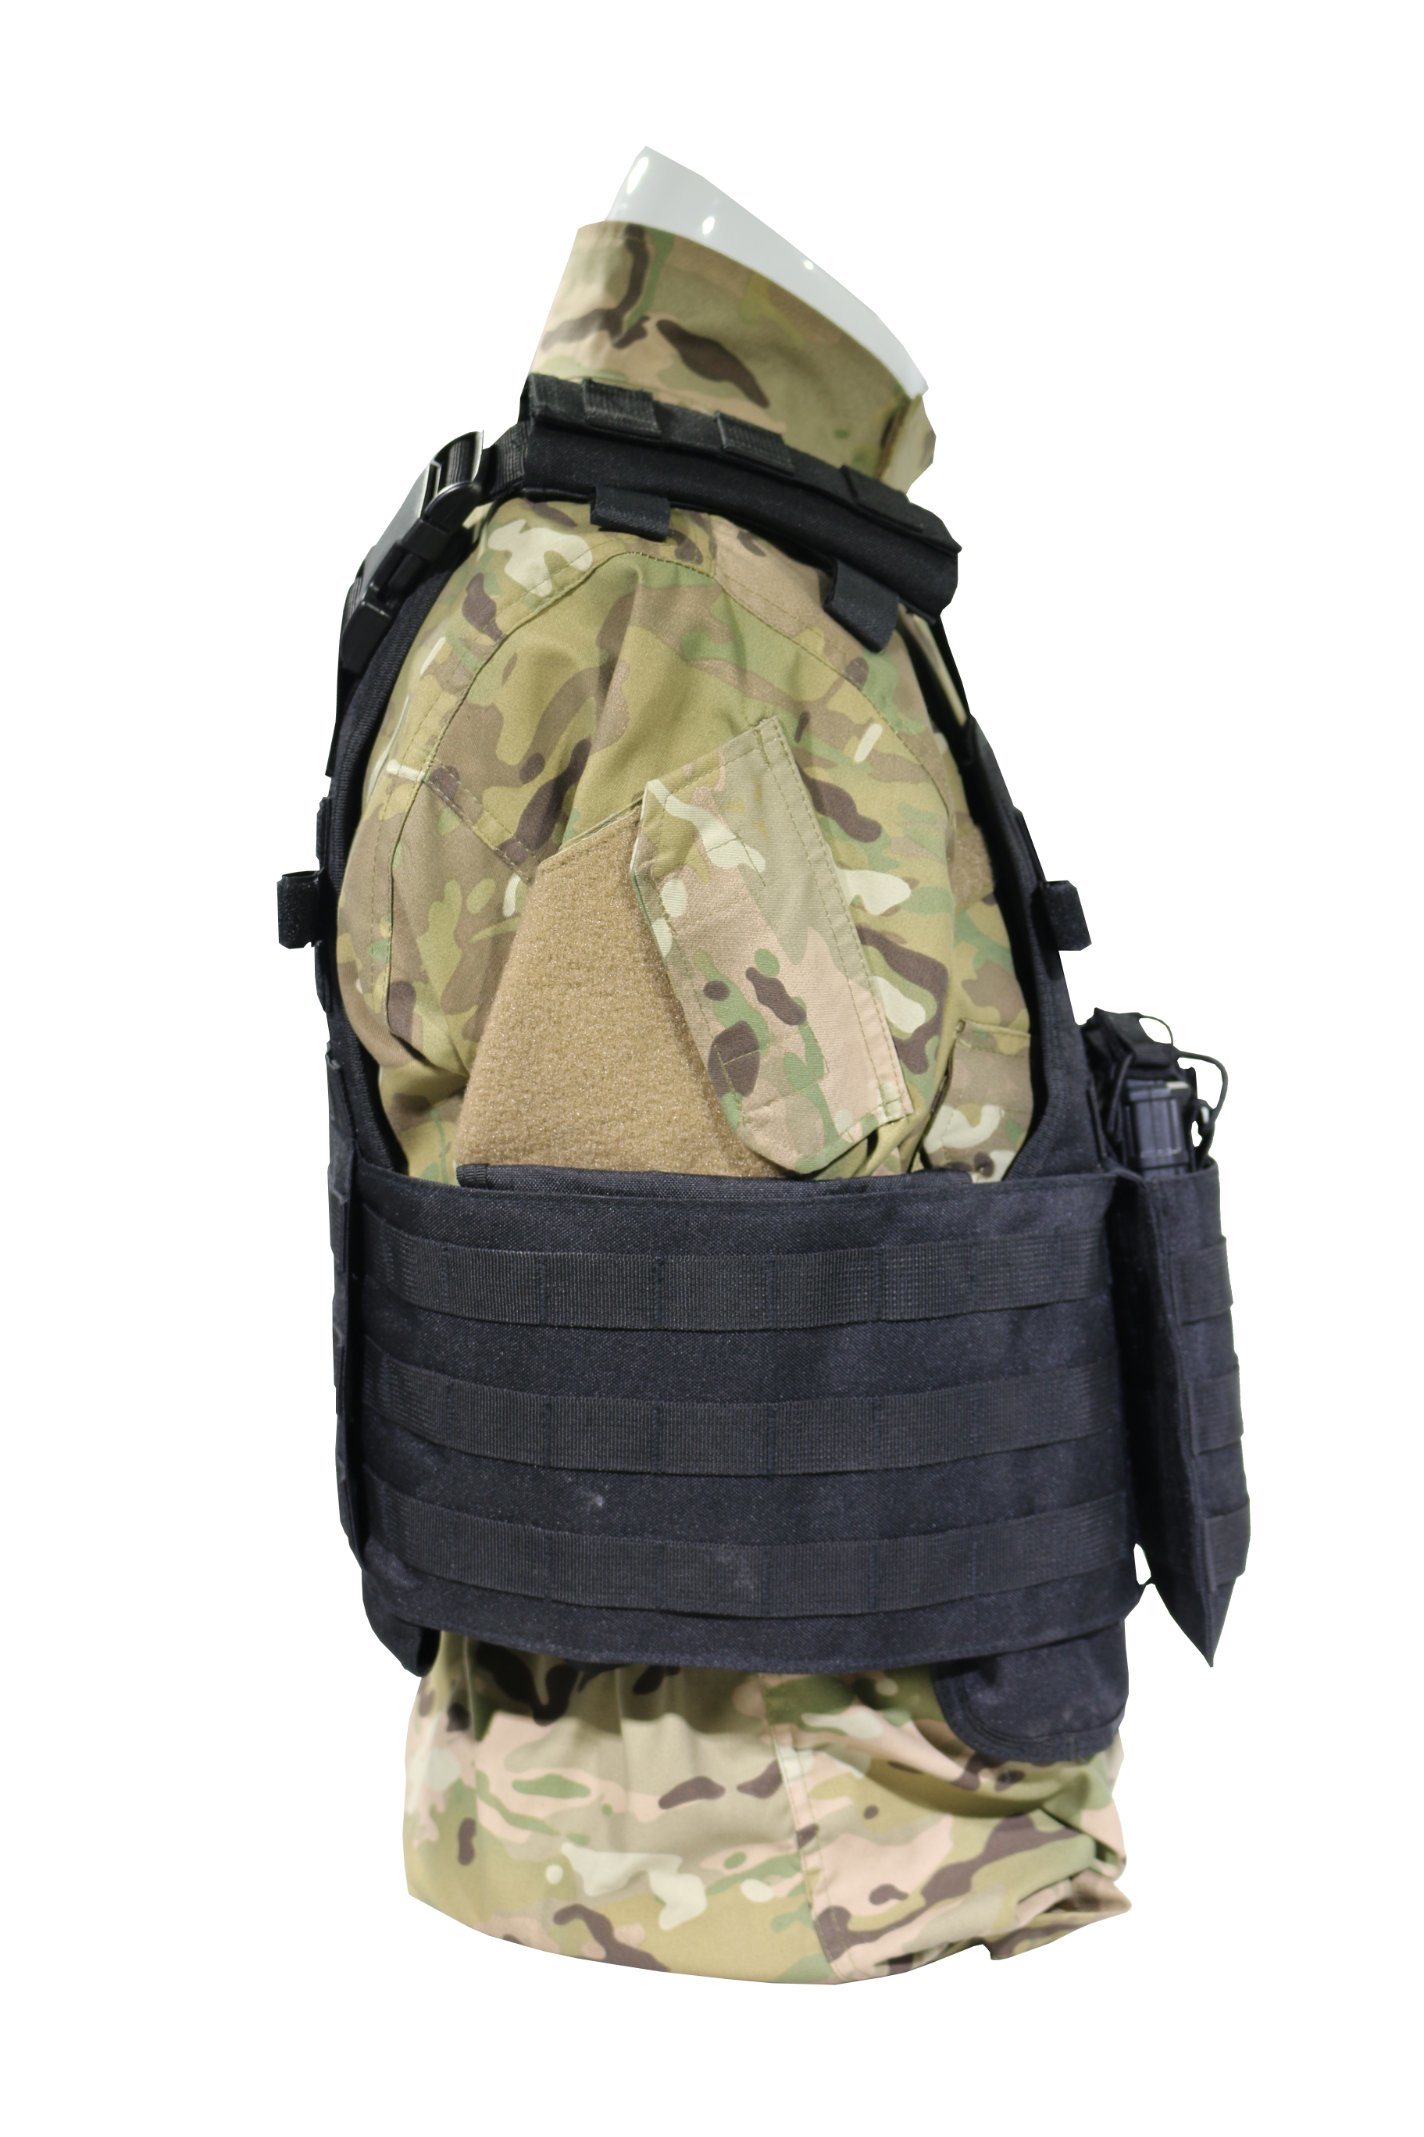 Tactical Plate Carrier Military Vest Molle Bag